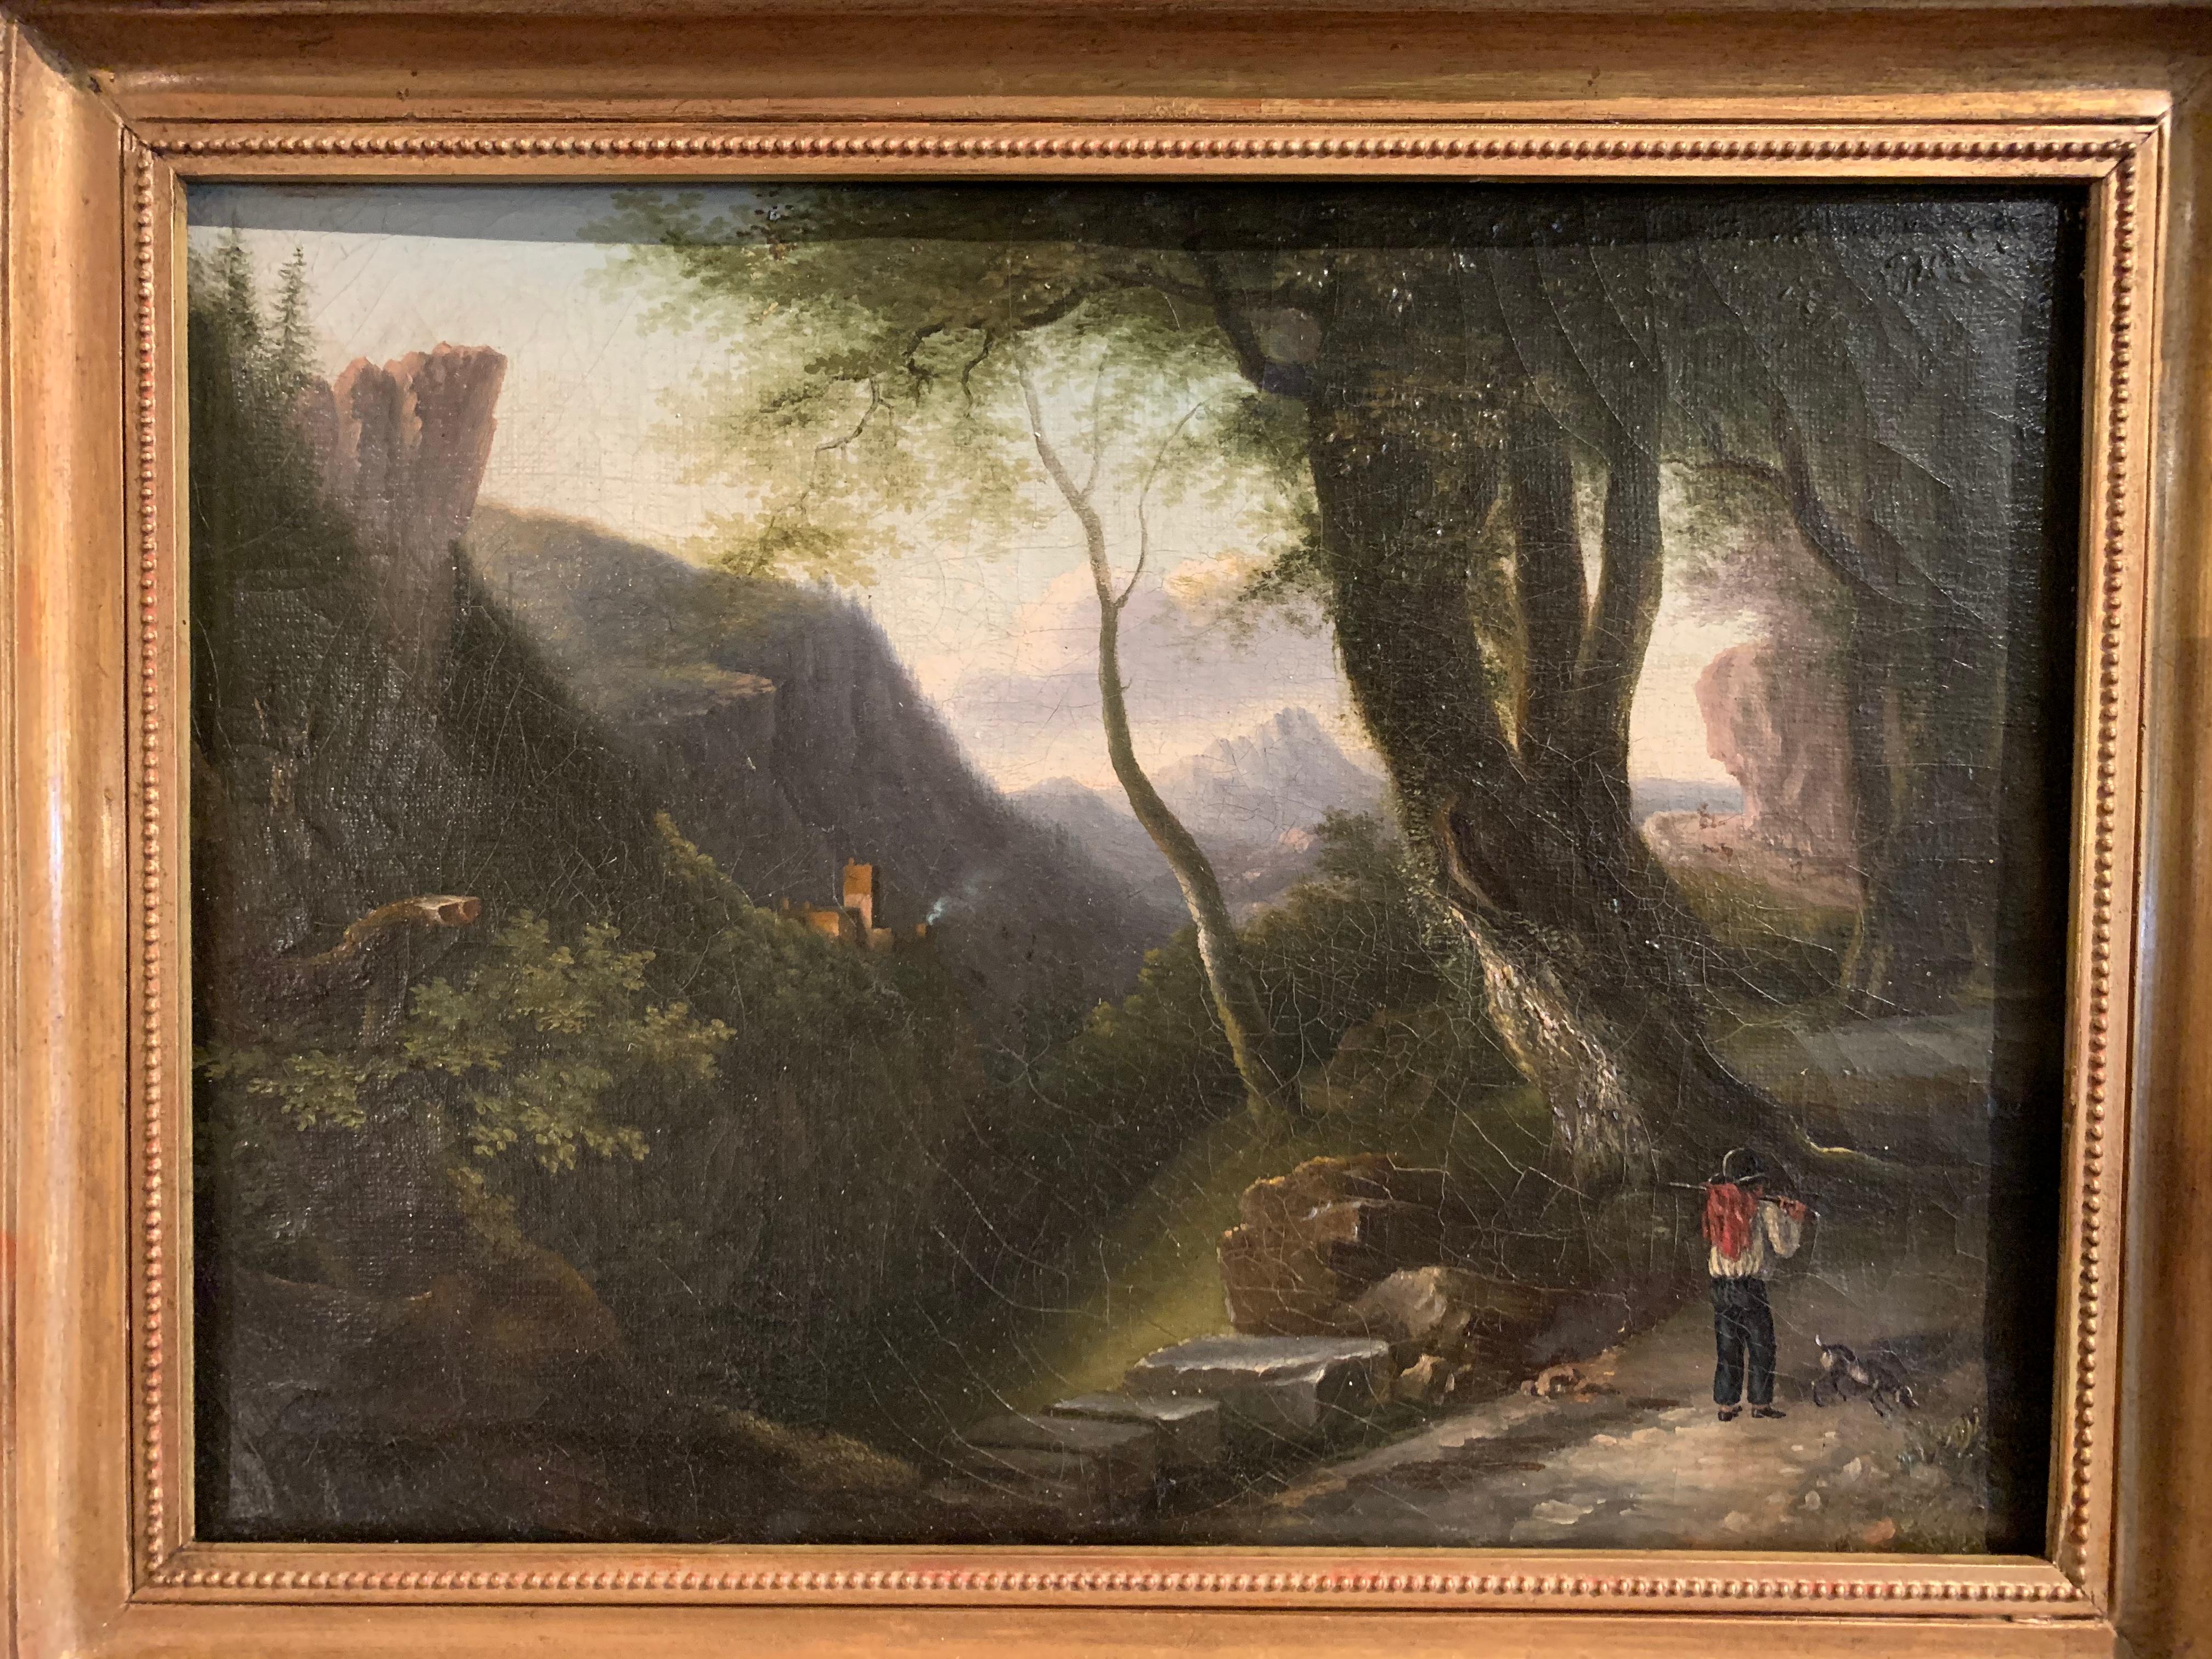 Set in the original carved giltwood frame, this delicate oil on canvas painting from the Barbizon School was done in France circa 1870; the canvas depicts a pastoral scene with a farmer carrying his bundle of wood on the shoulder. The artwork shows